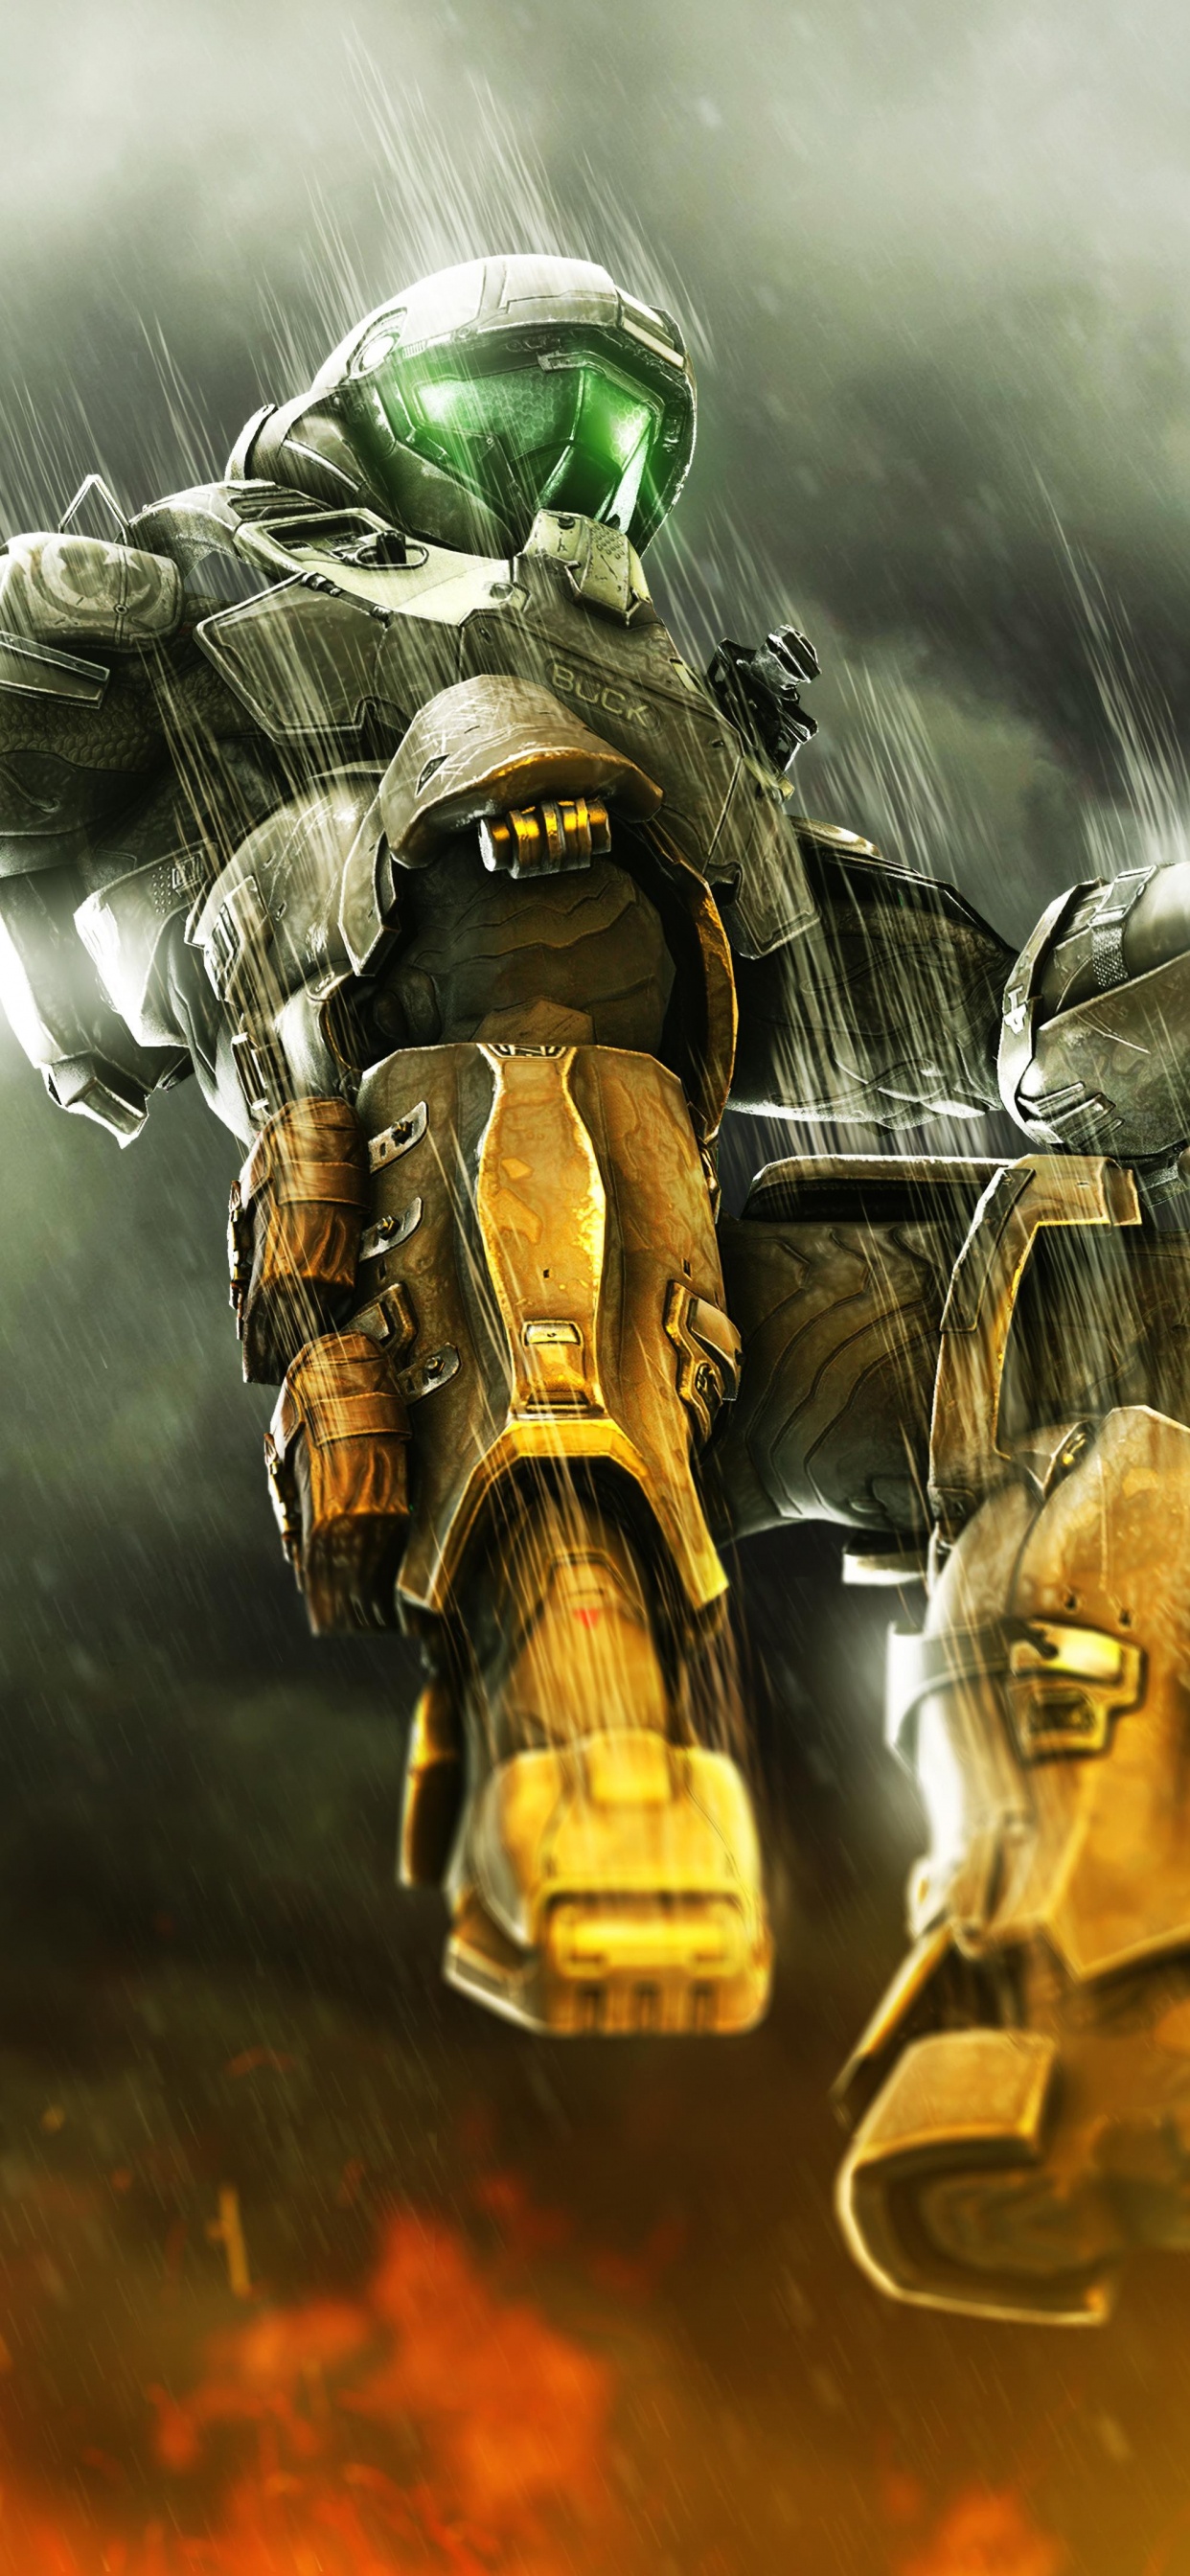 Halo 3, Master Chief, pc Game, Freestyle Motocross, Motocross. Wallpaper in 1242x2688 Resolution